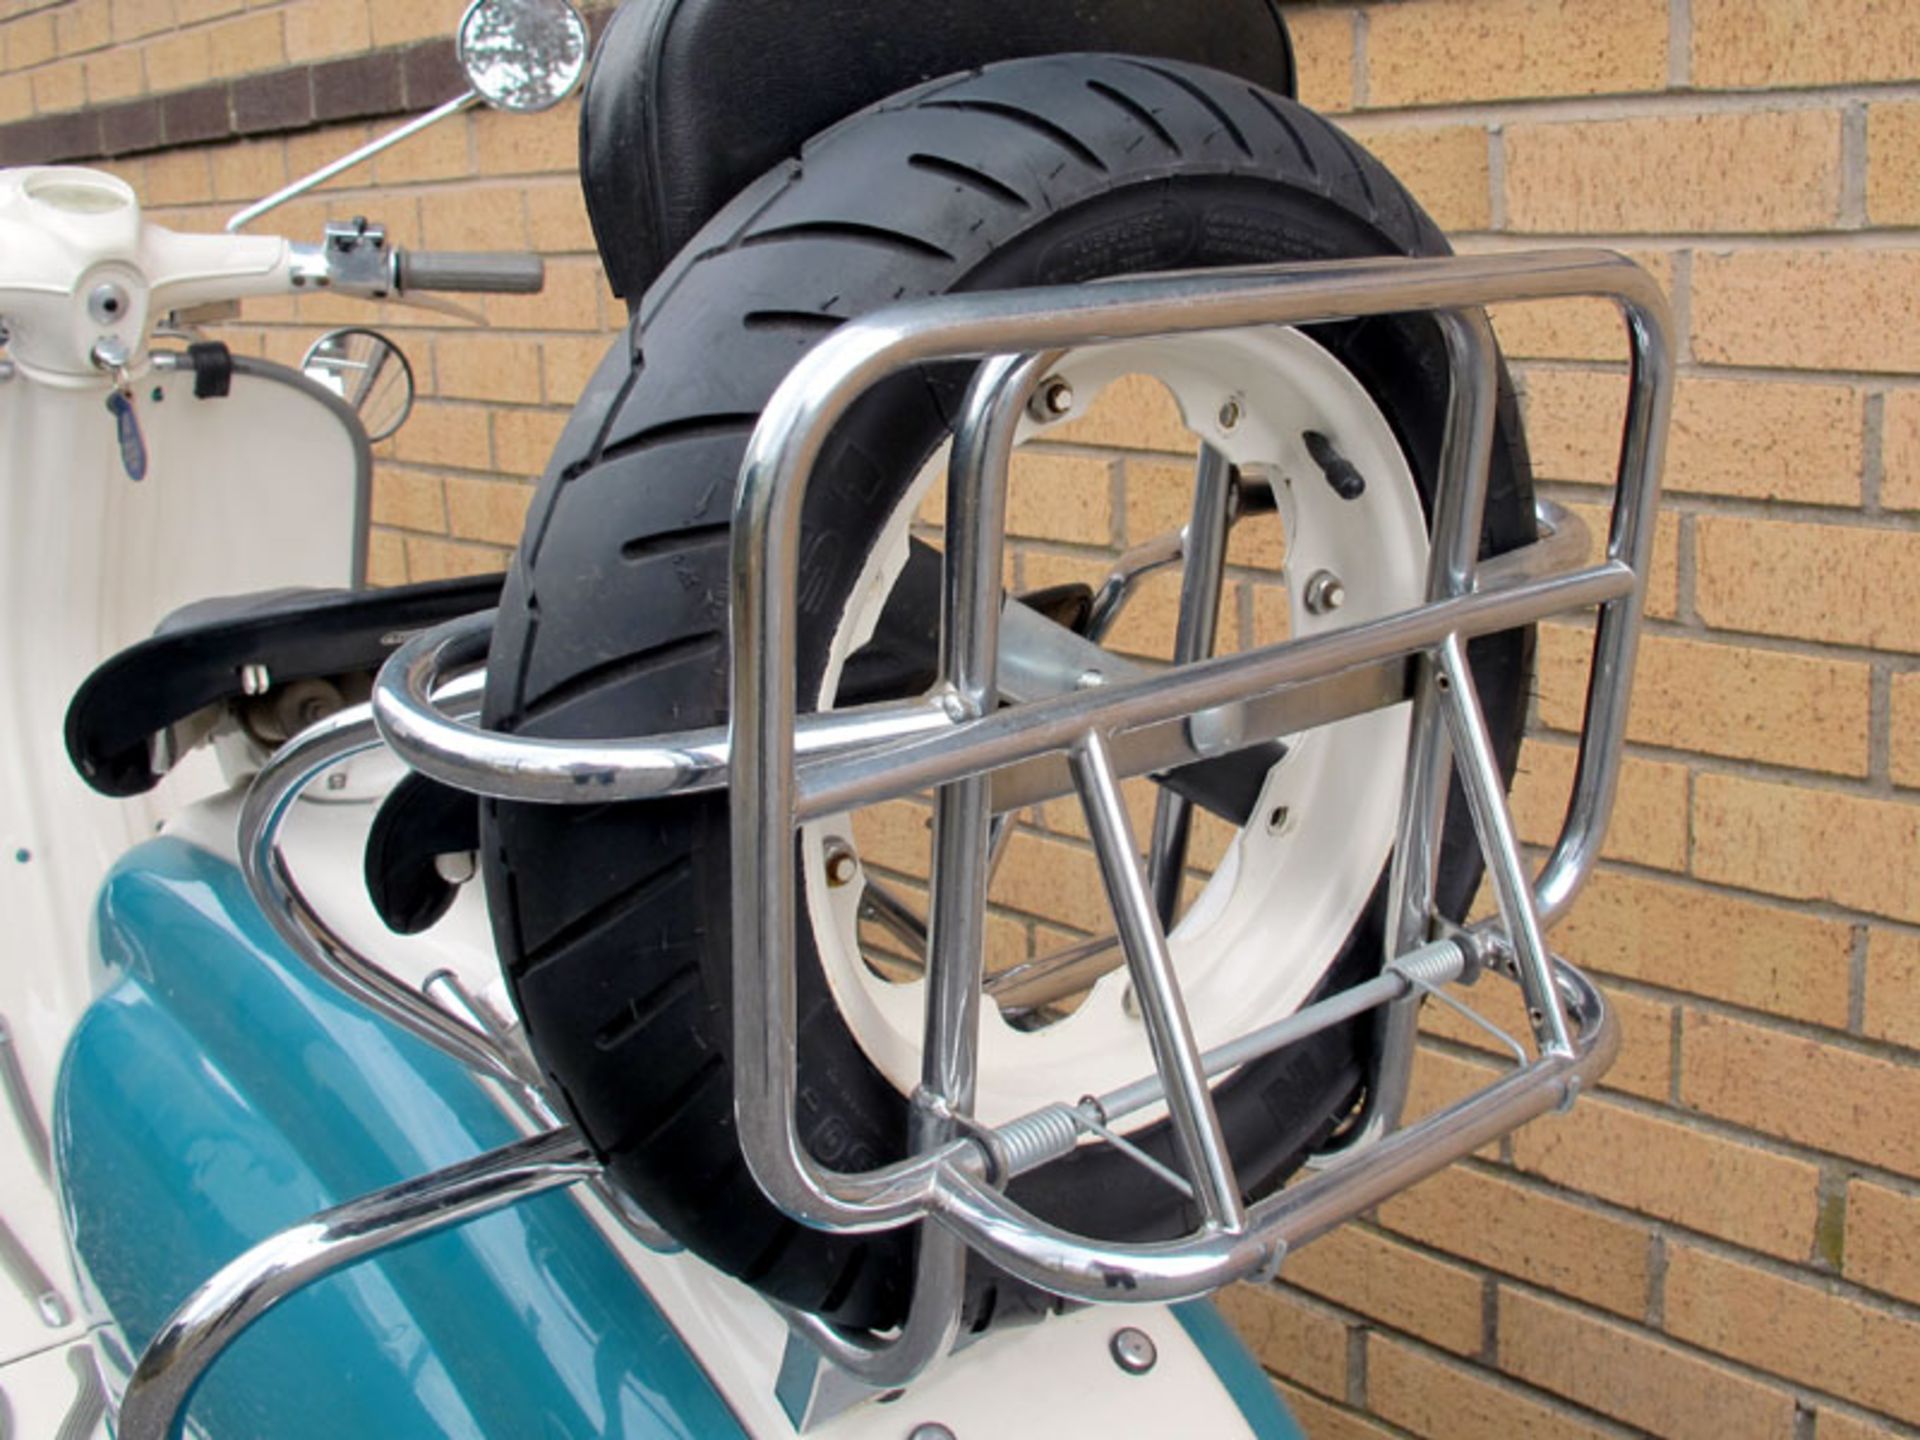 - Restored example

- Original specification

- Iconic 60's Scooter - Image 3 of 4